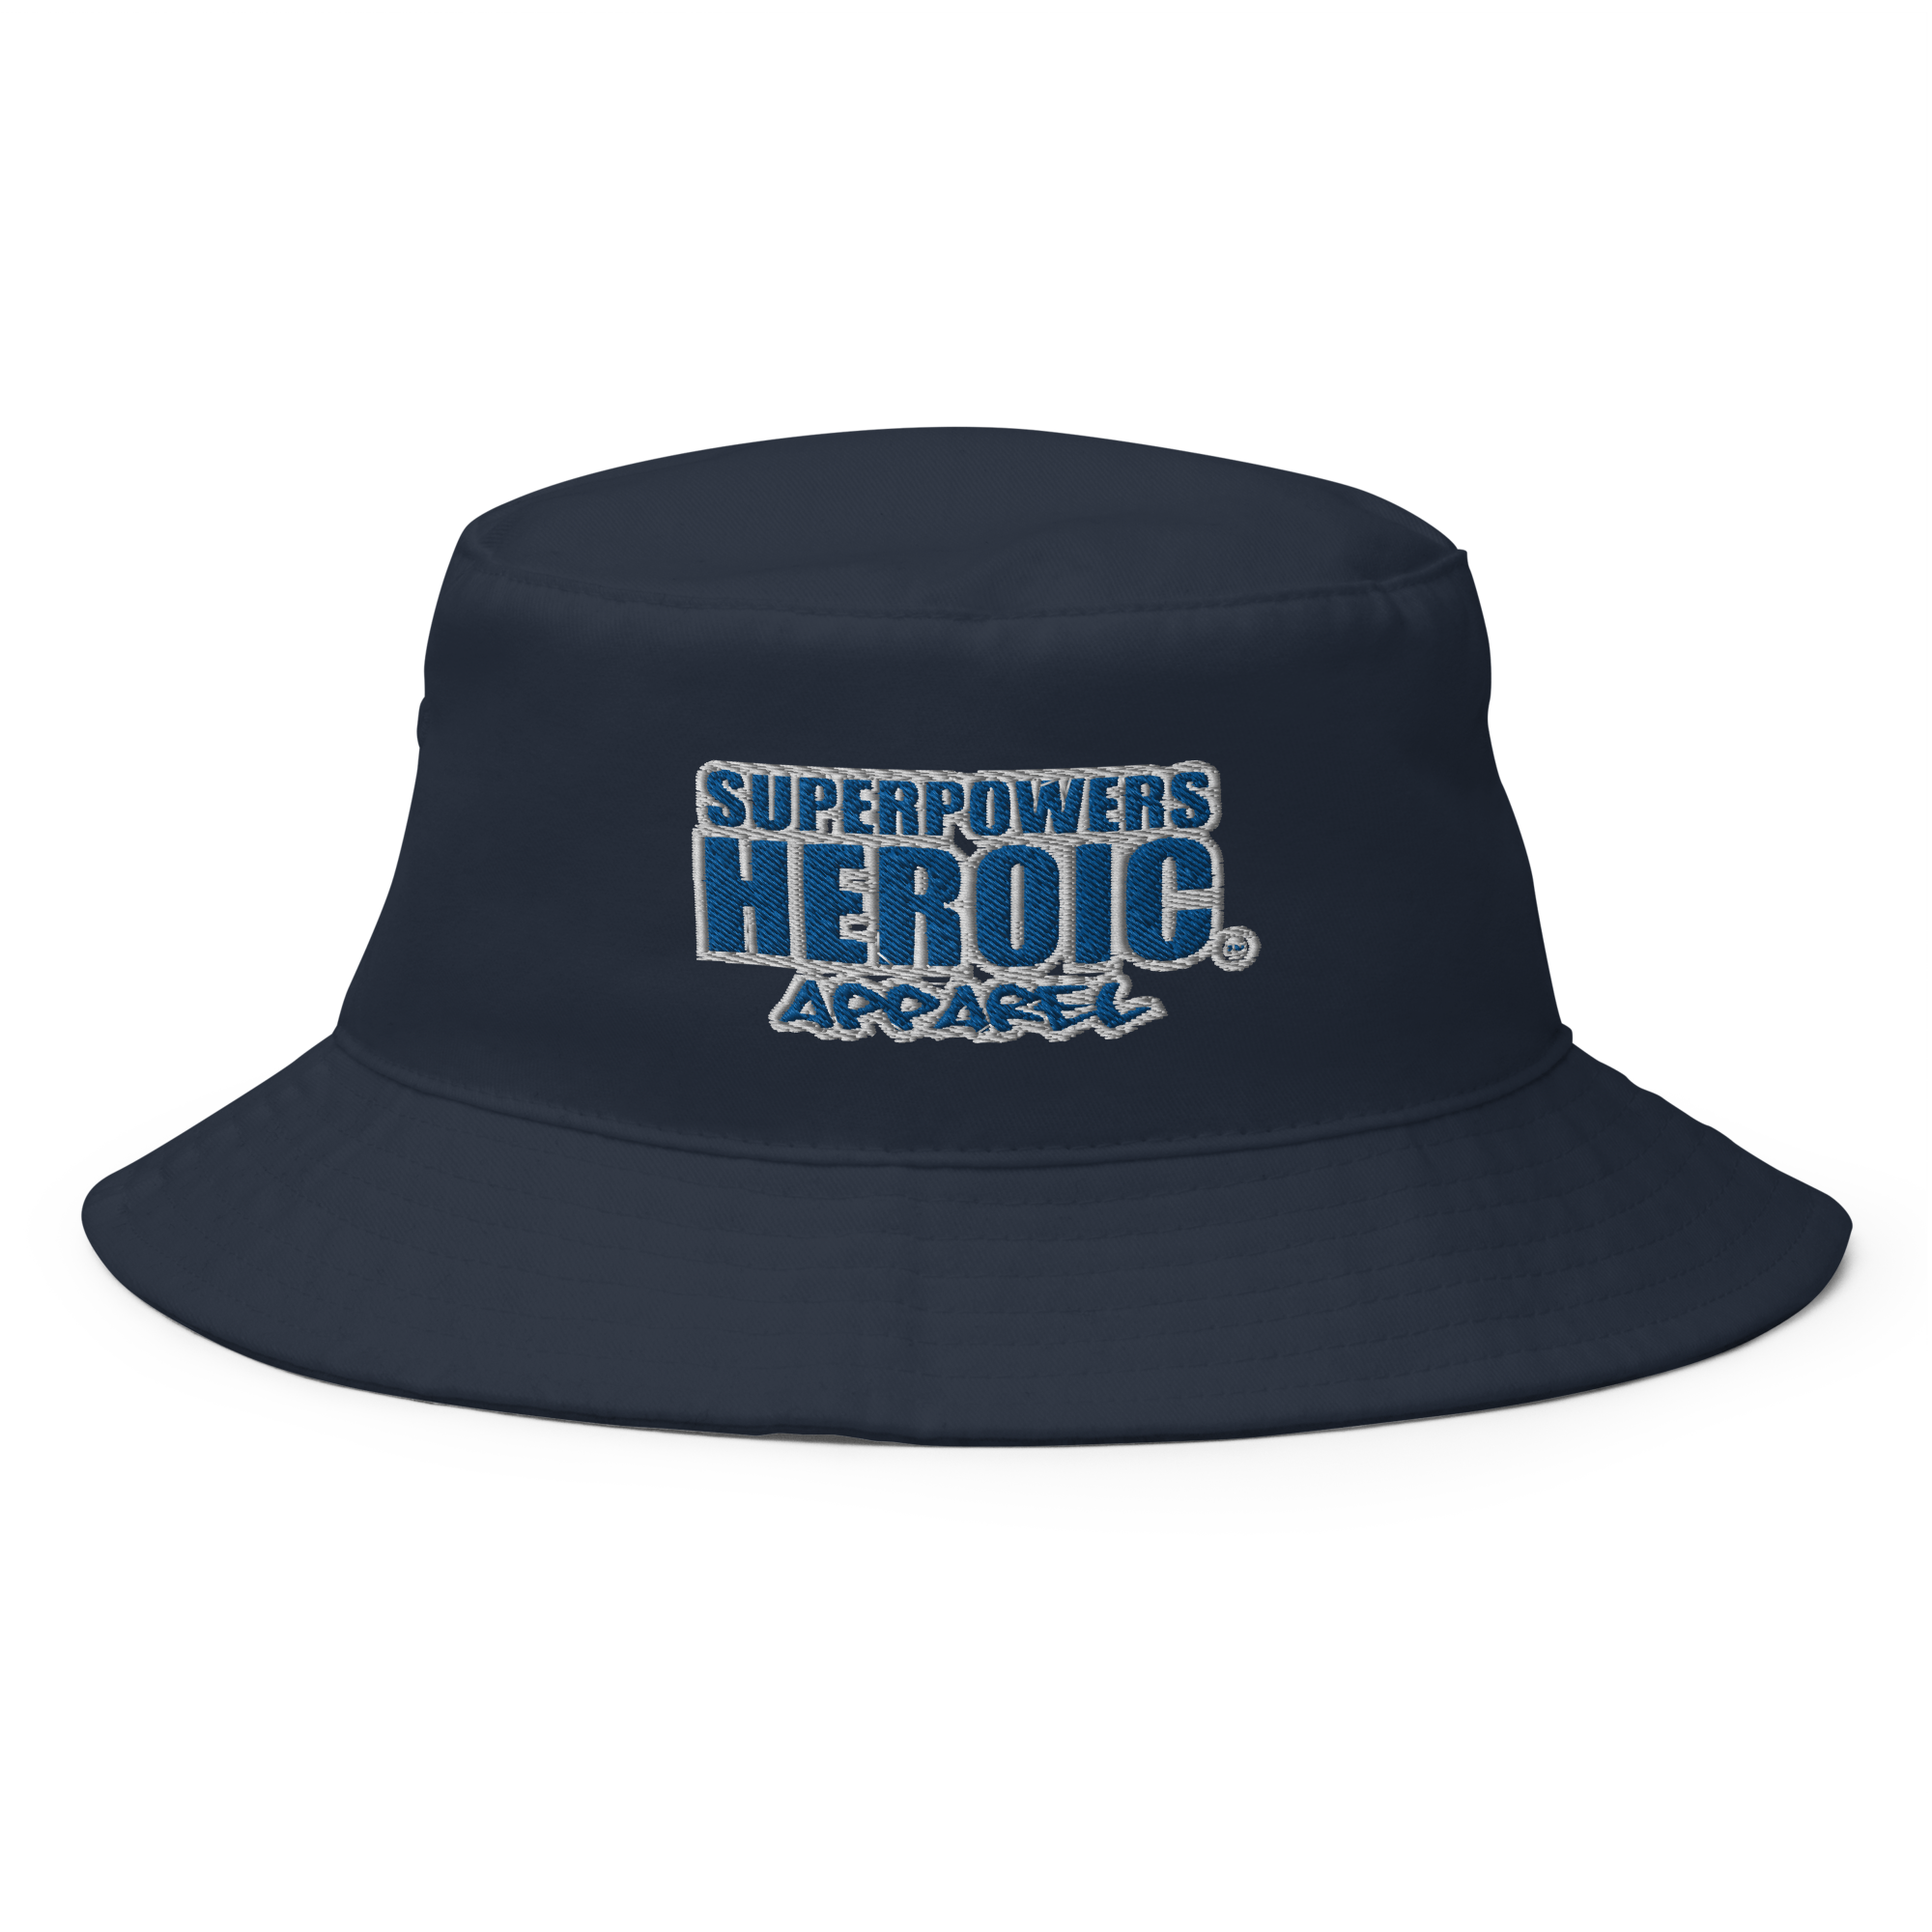 SUPERPOWERS HEROIC APPAREL (A) Bucket Hat - SUPERPOWERS HEROIC APPAREL